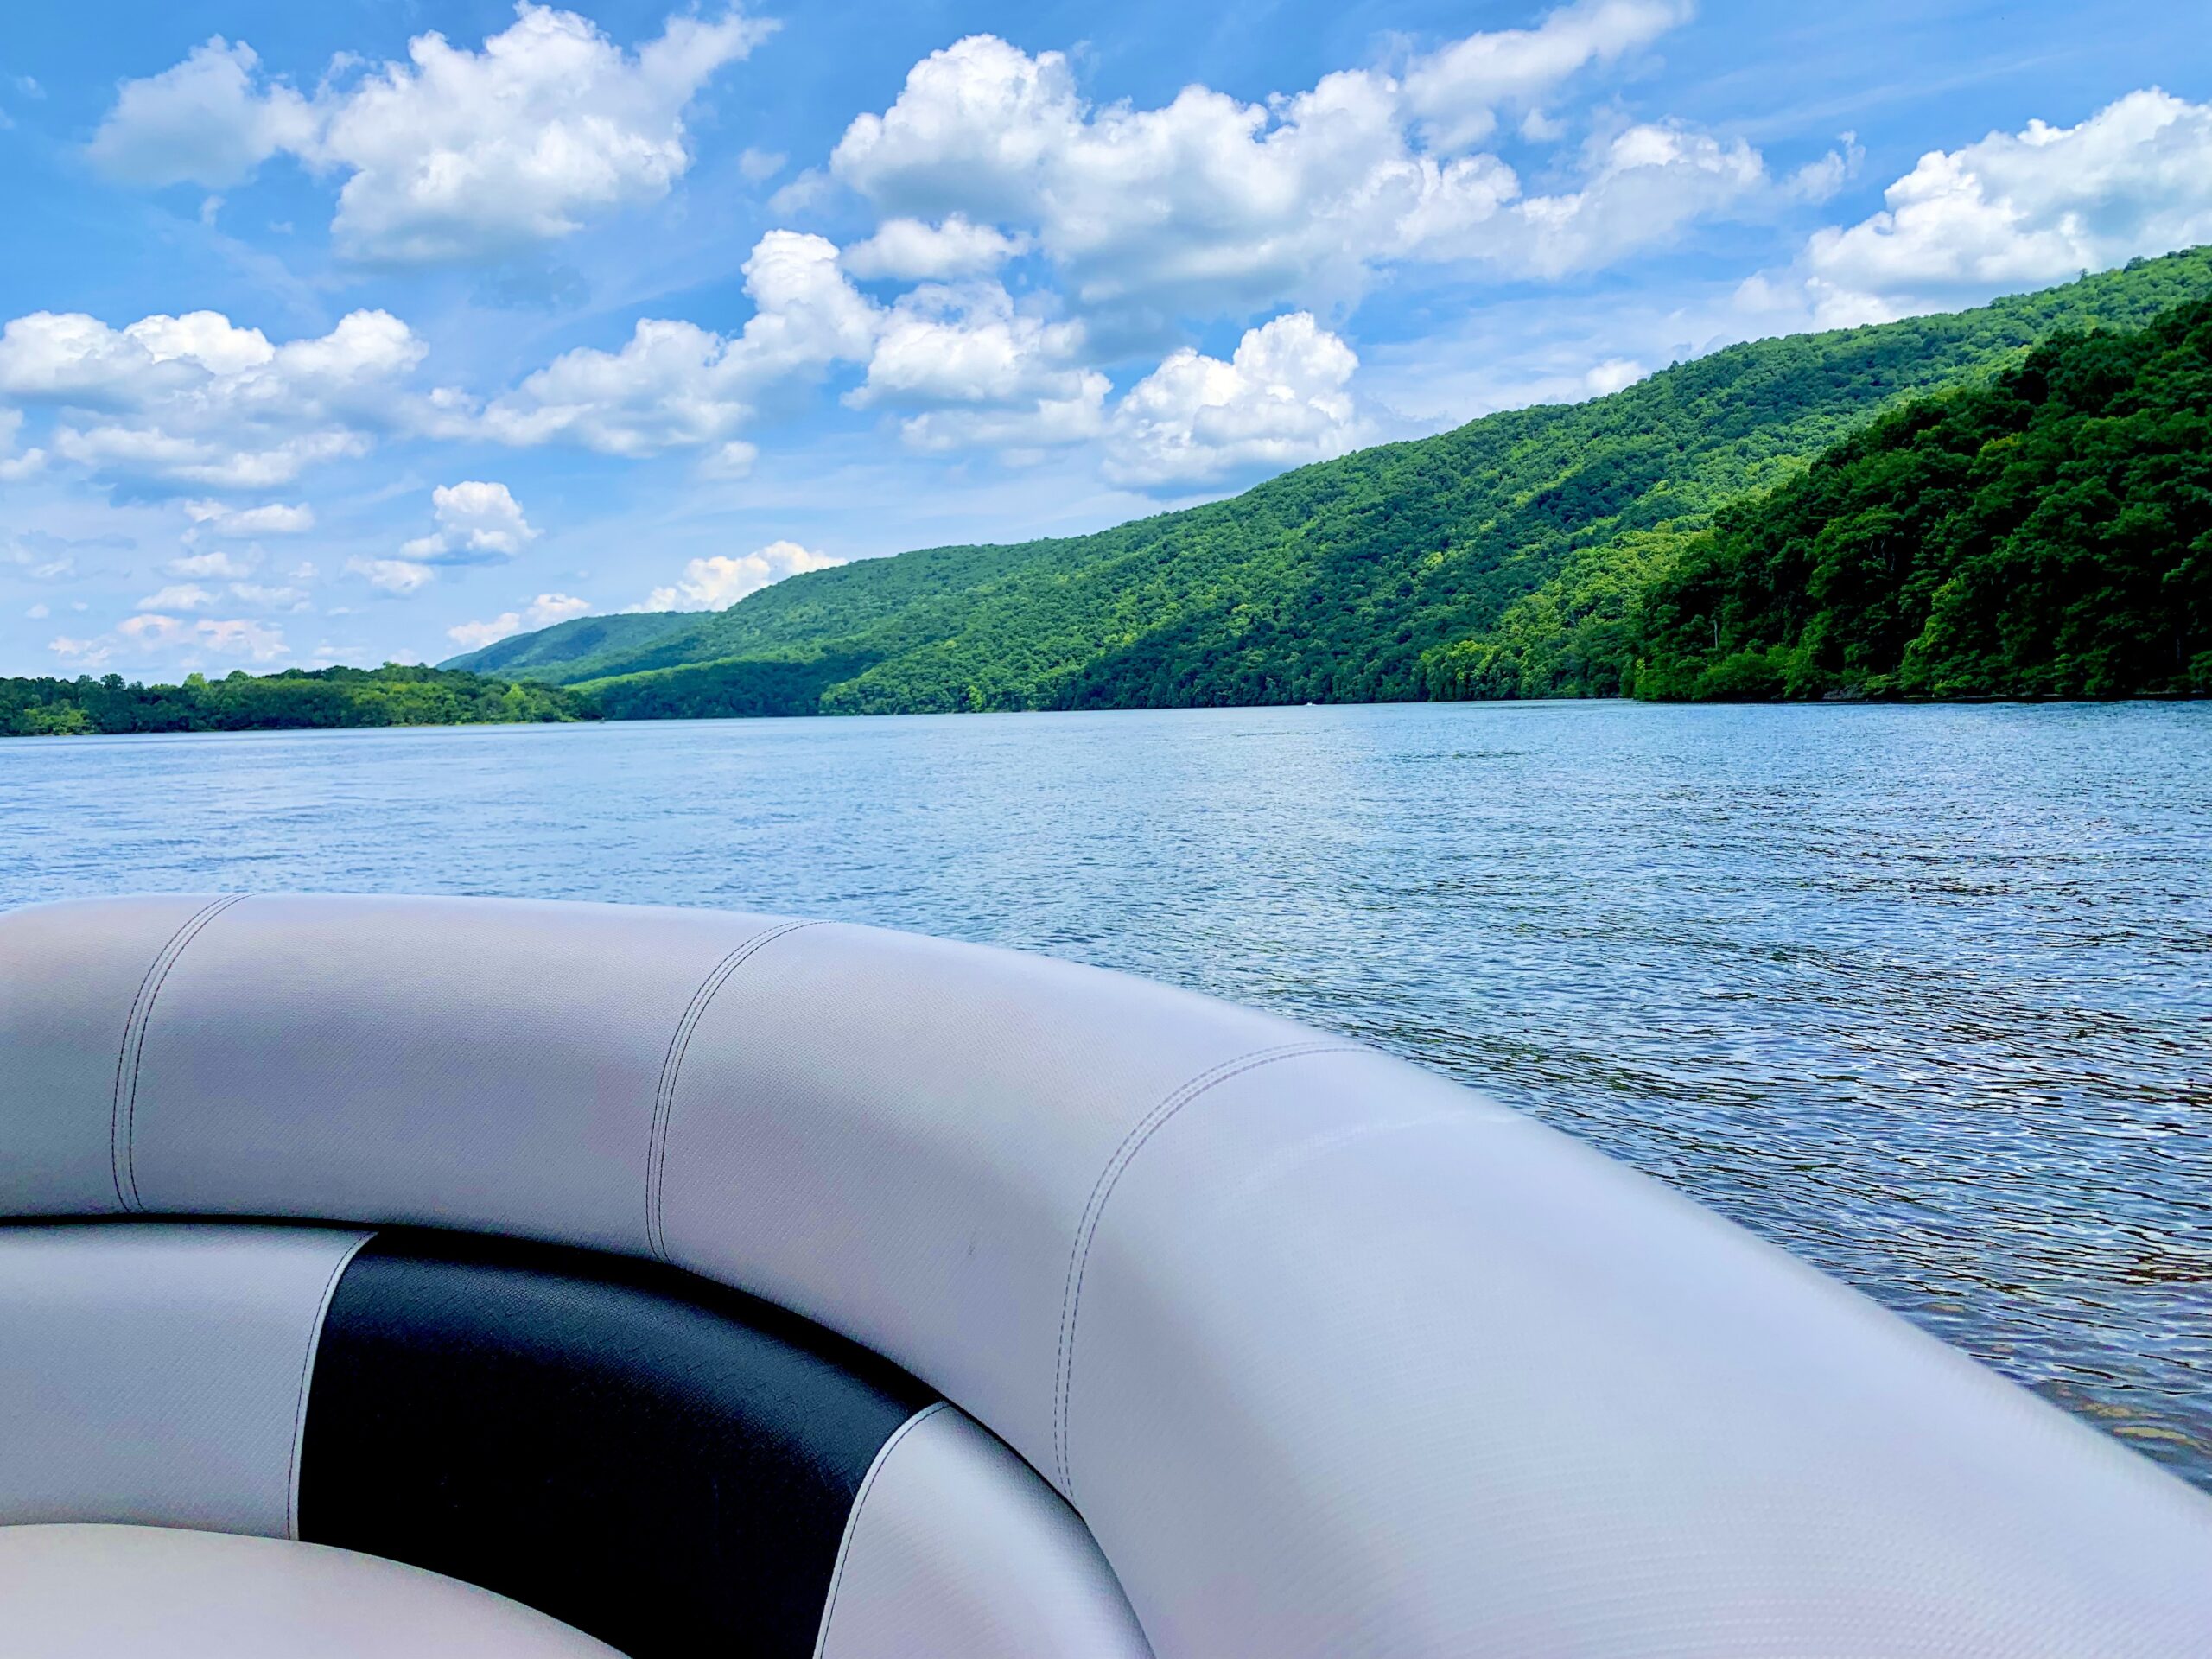 Rent a Boat at Raystown Lake: Explore Hidden Gems and Make Memories